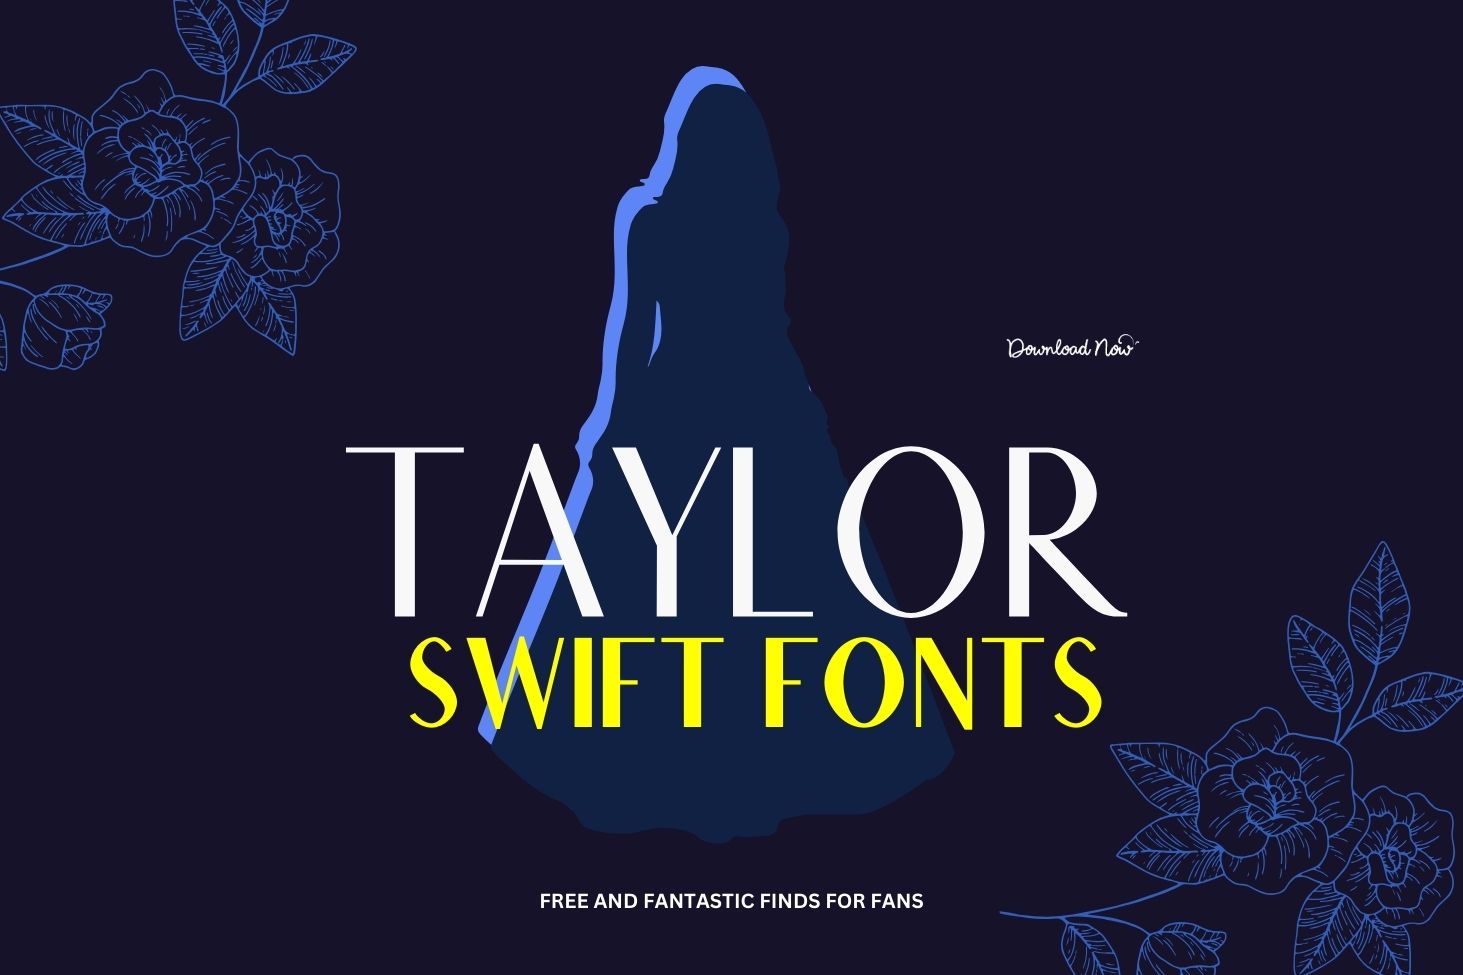 Featured image showcasing 'Taylor Swift Fonts' in bold white and yellow letters on a dark blue background with floral designs and a silhouette of Taylor Swift. Text at the bottom says 'Free and Fantastic Finds for Fans' with a 'Download Now' note on the side.